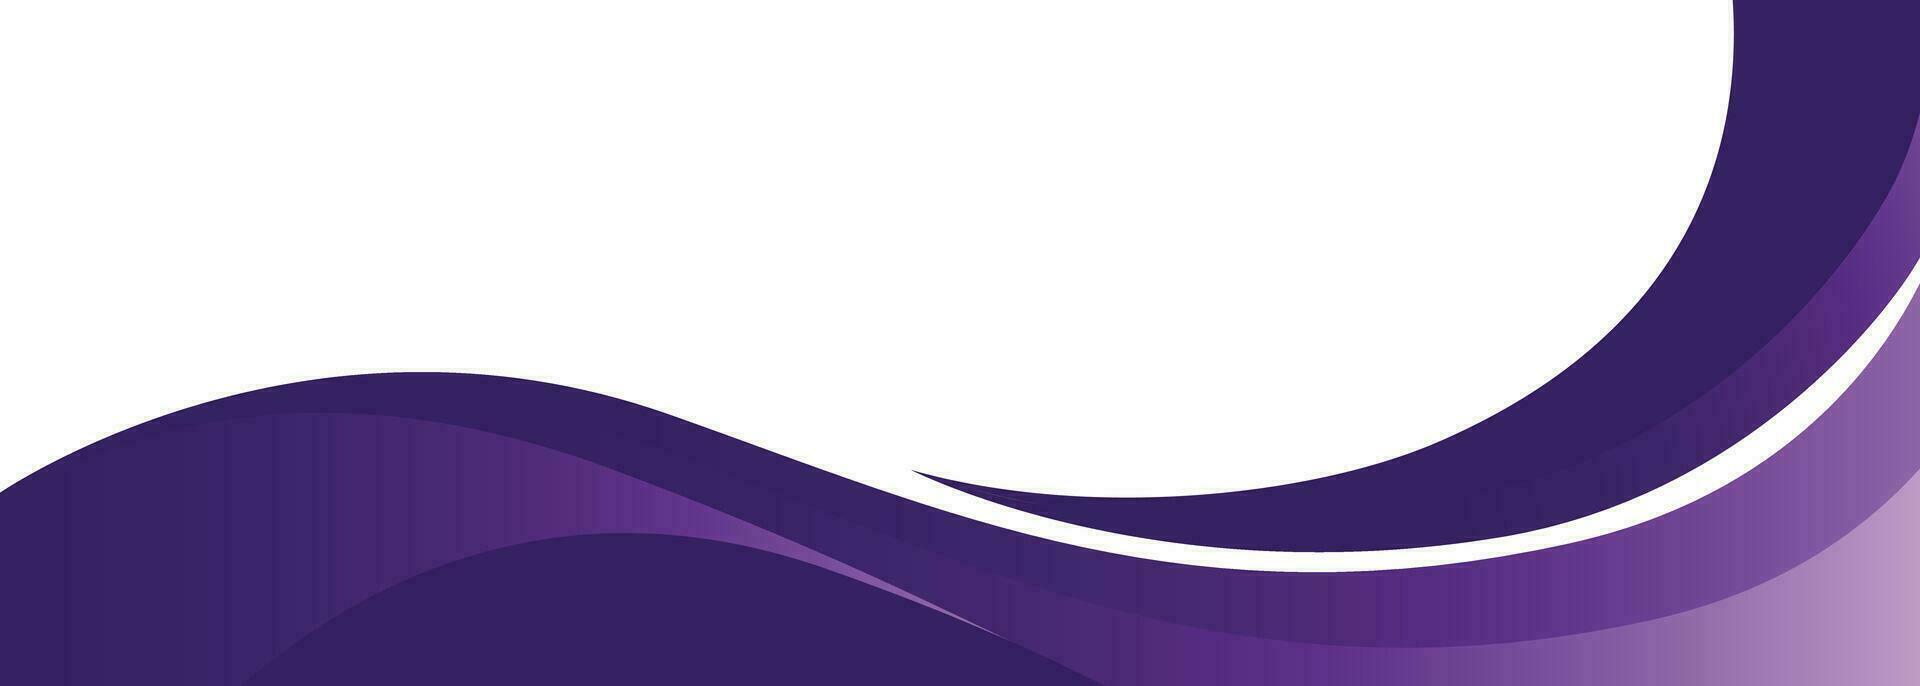 abstract purple background with waves vector